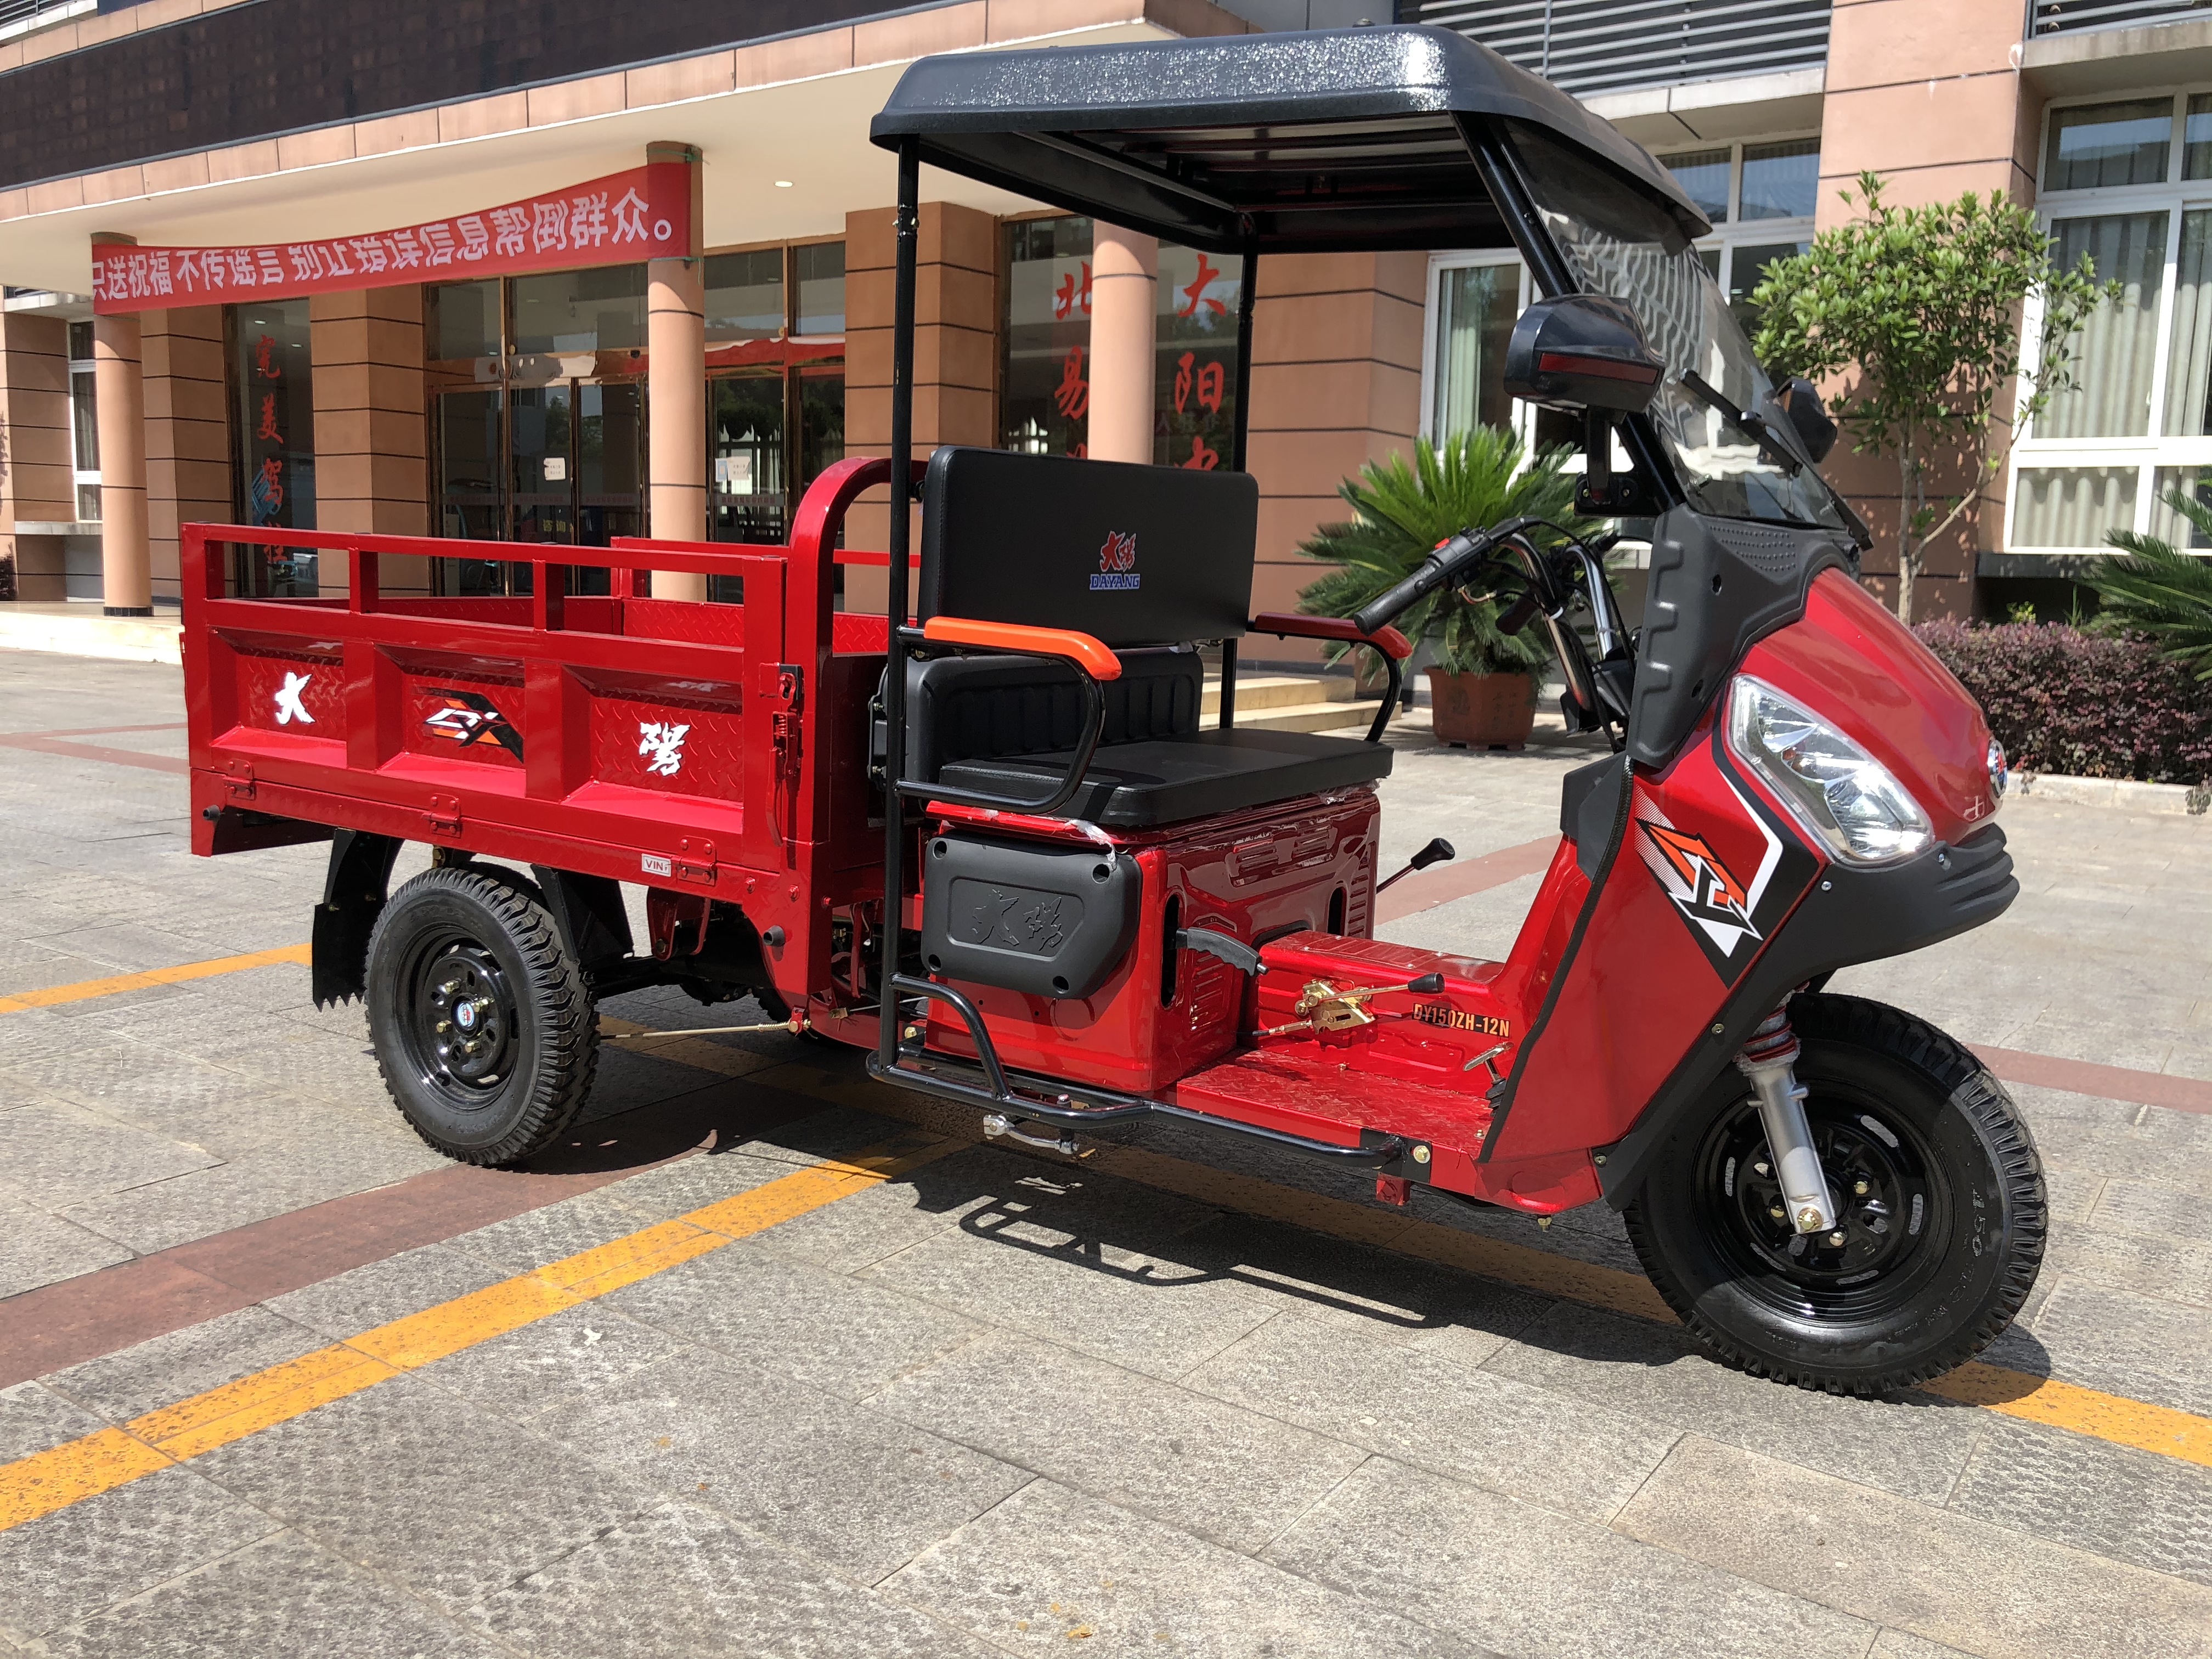 DY-Z2A 200CC LIFAN engine cargo tricycle motorcycle sells well at Africa